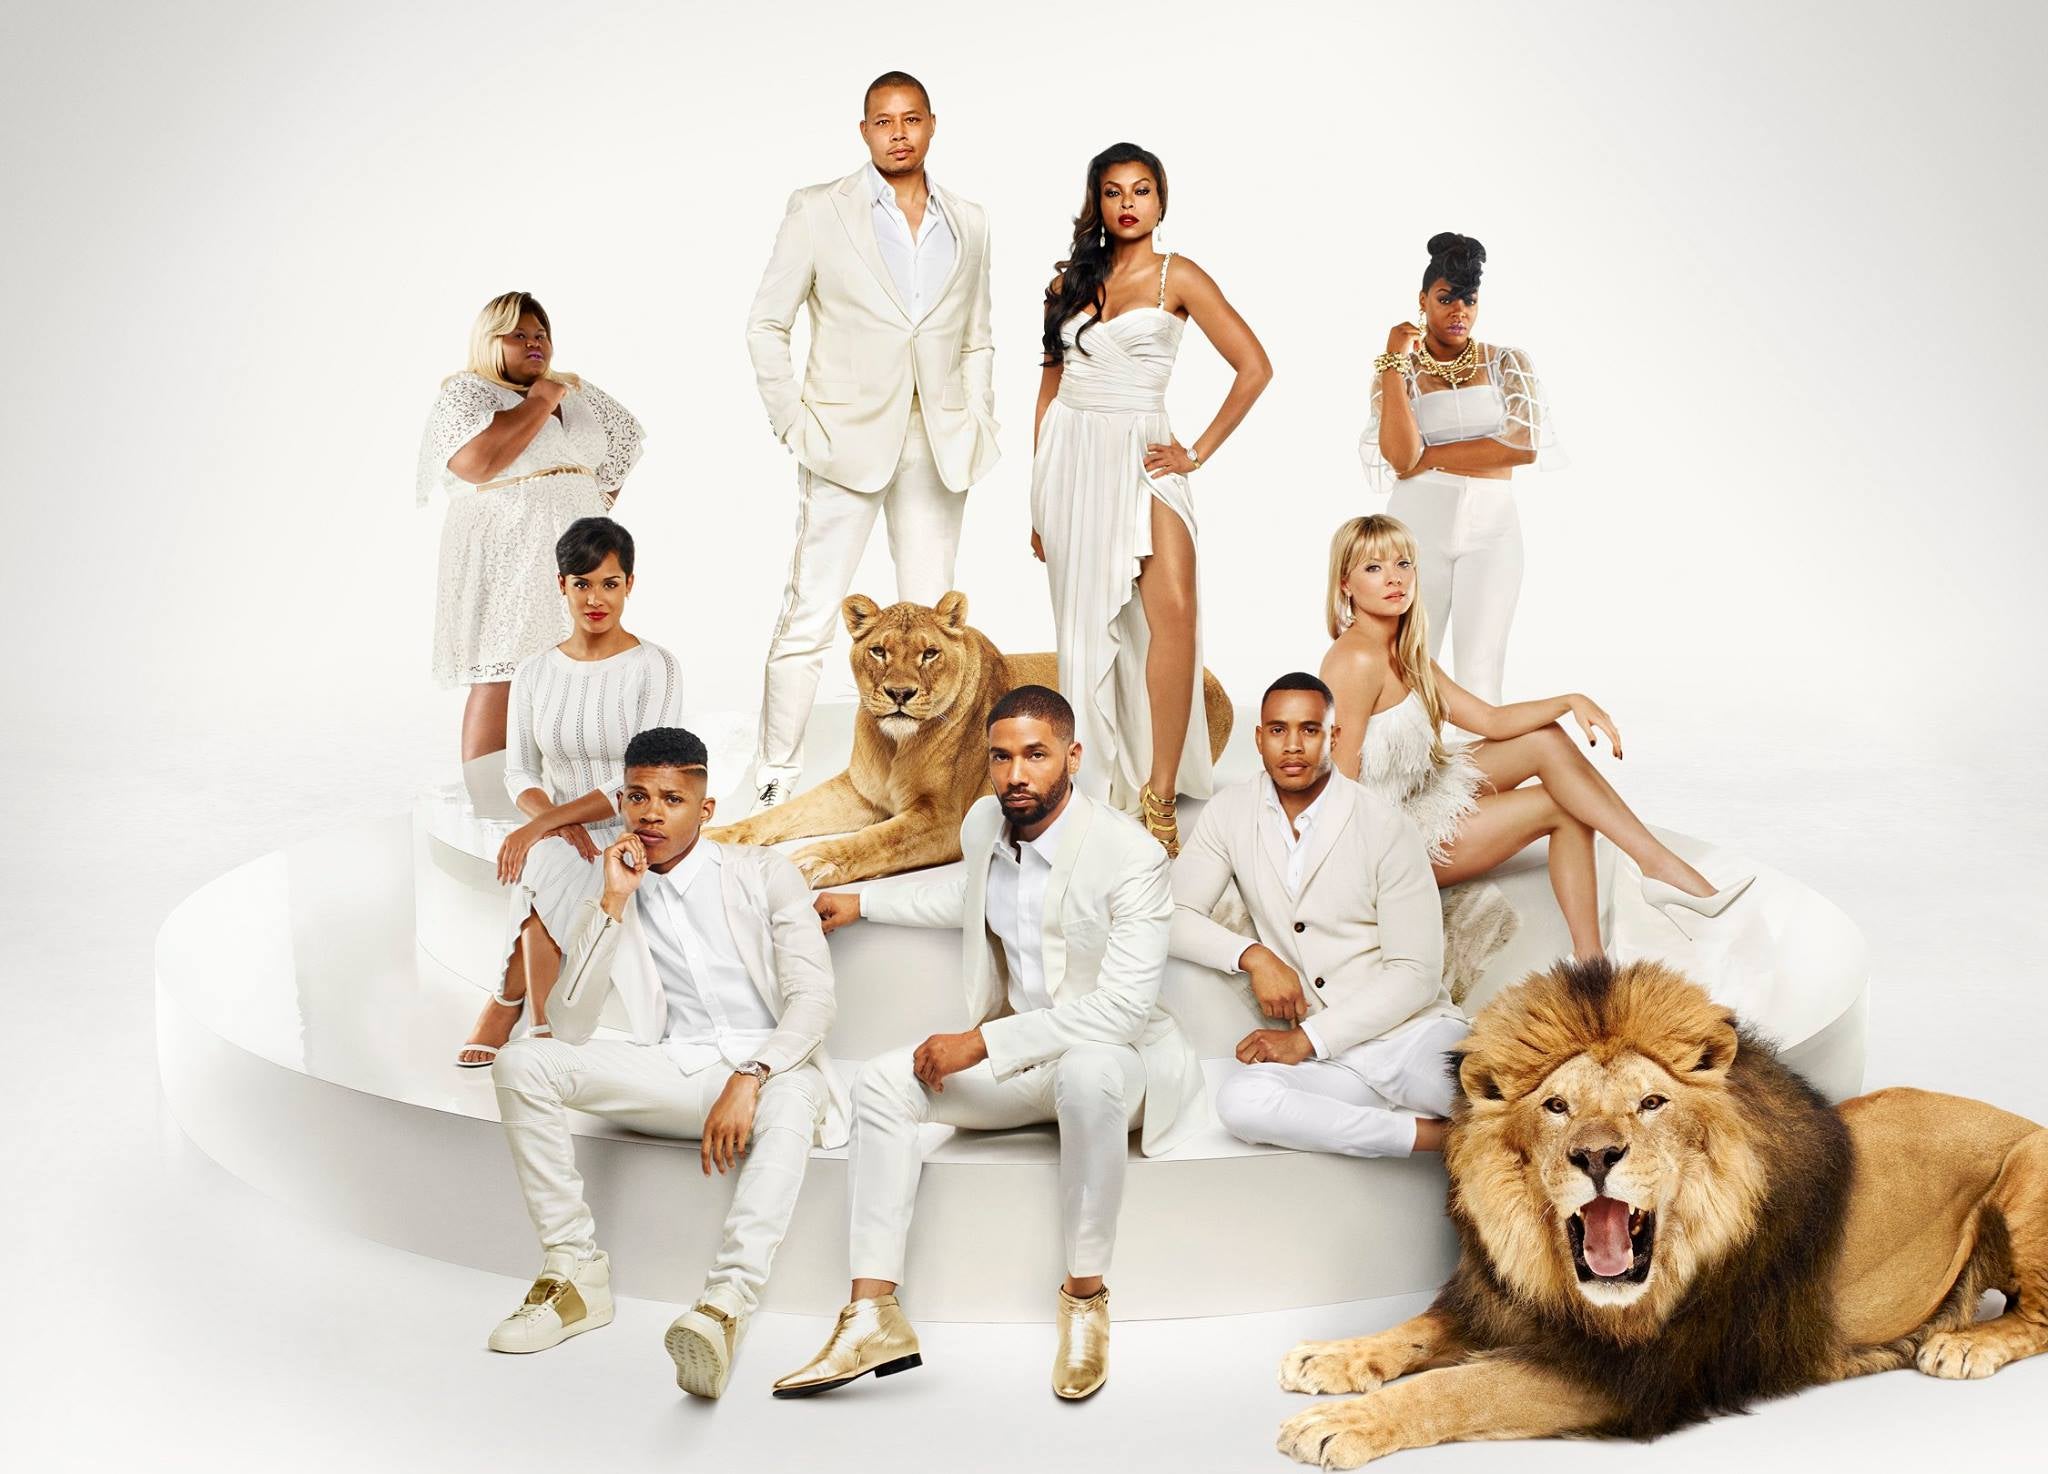 What Was Your Favorite Moment From the Season 2 Premiere of 'Empire'?
